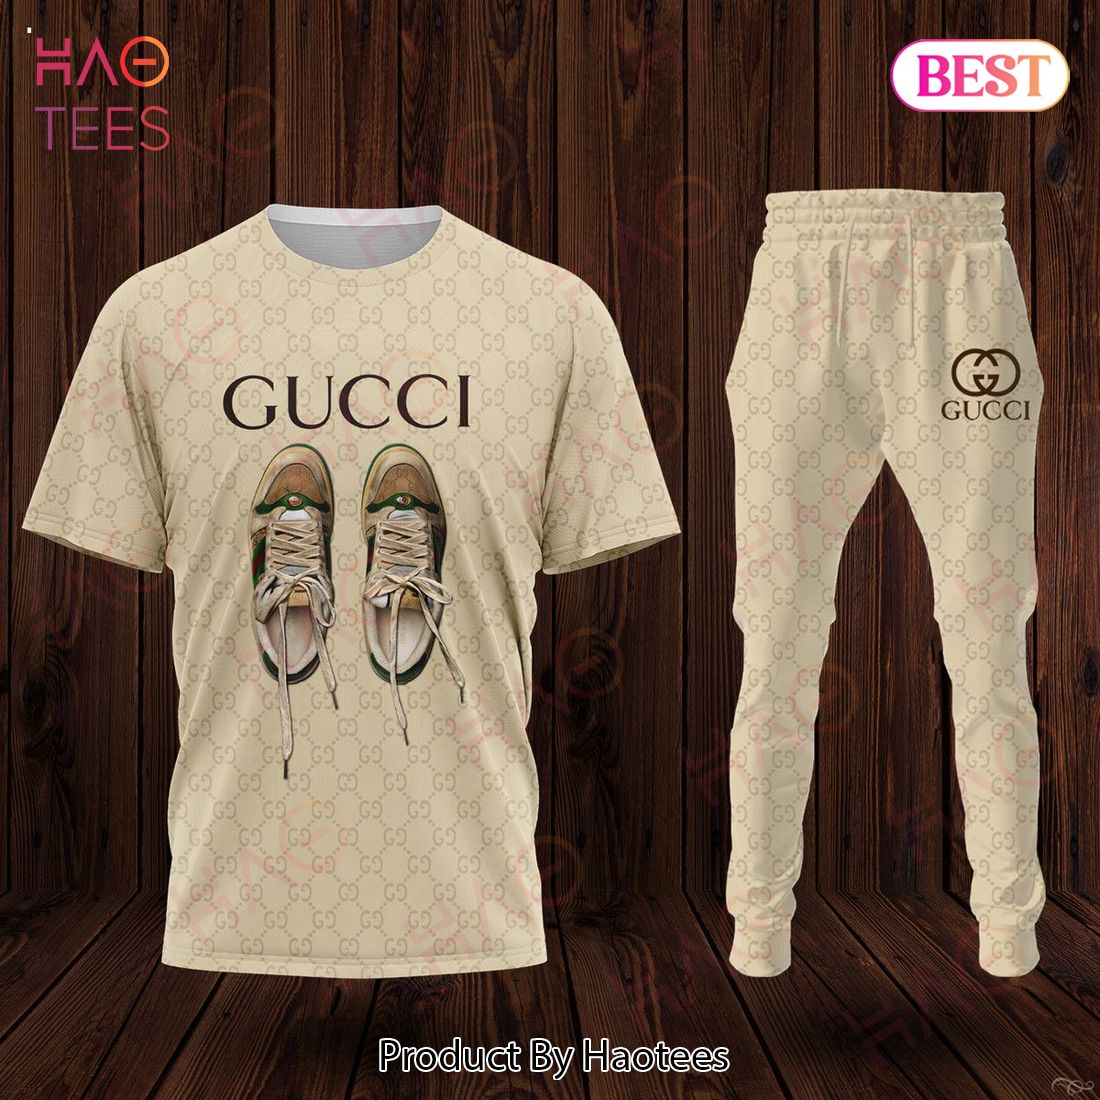 Gucci Brown Logo Mix Beige Colored Luxury Brand T-Shirt And Pants Limited Edition